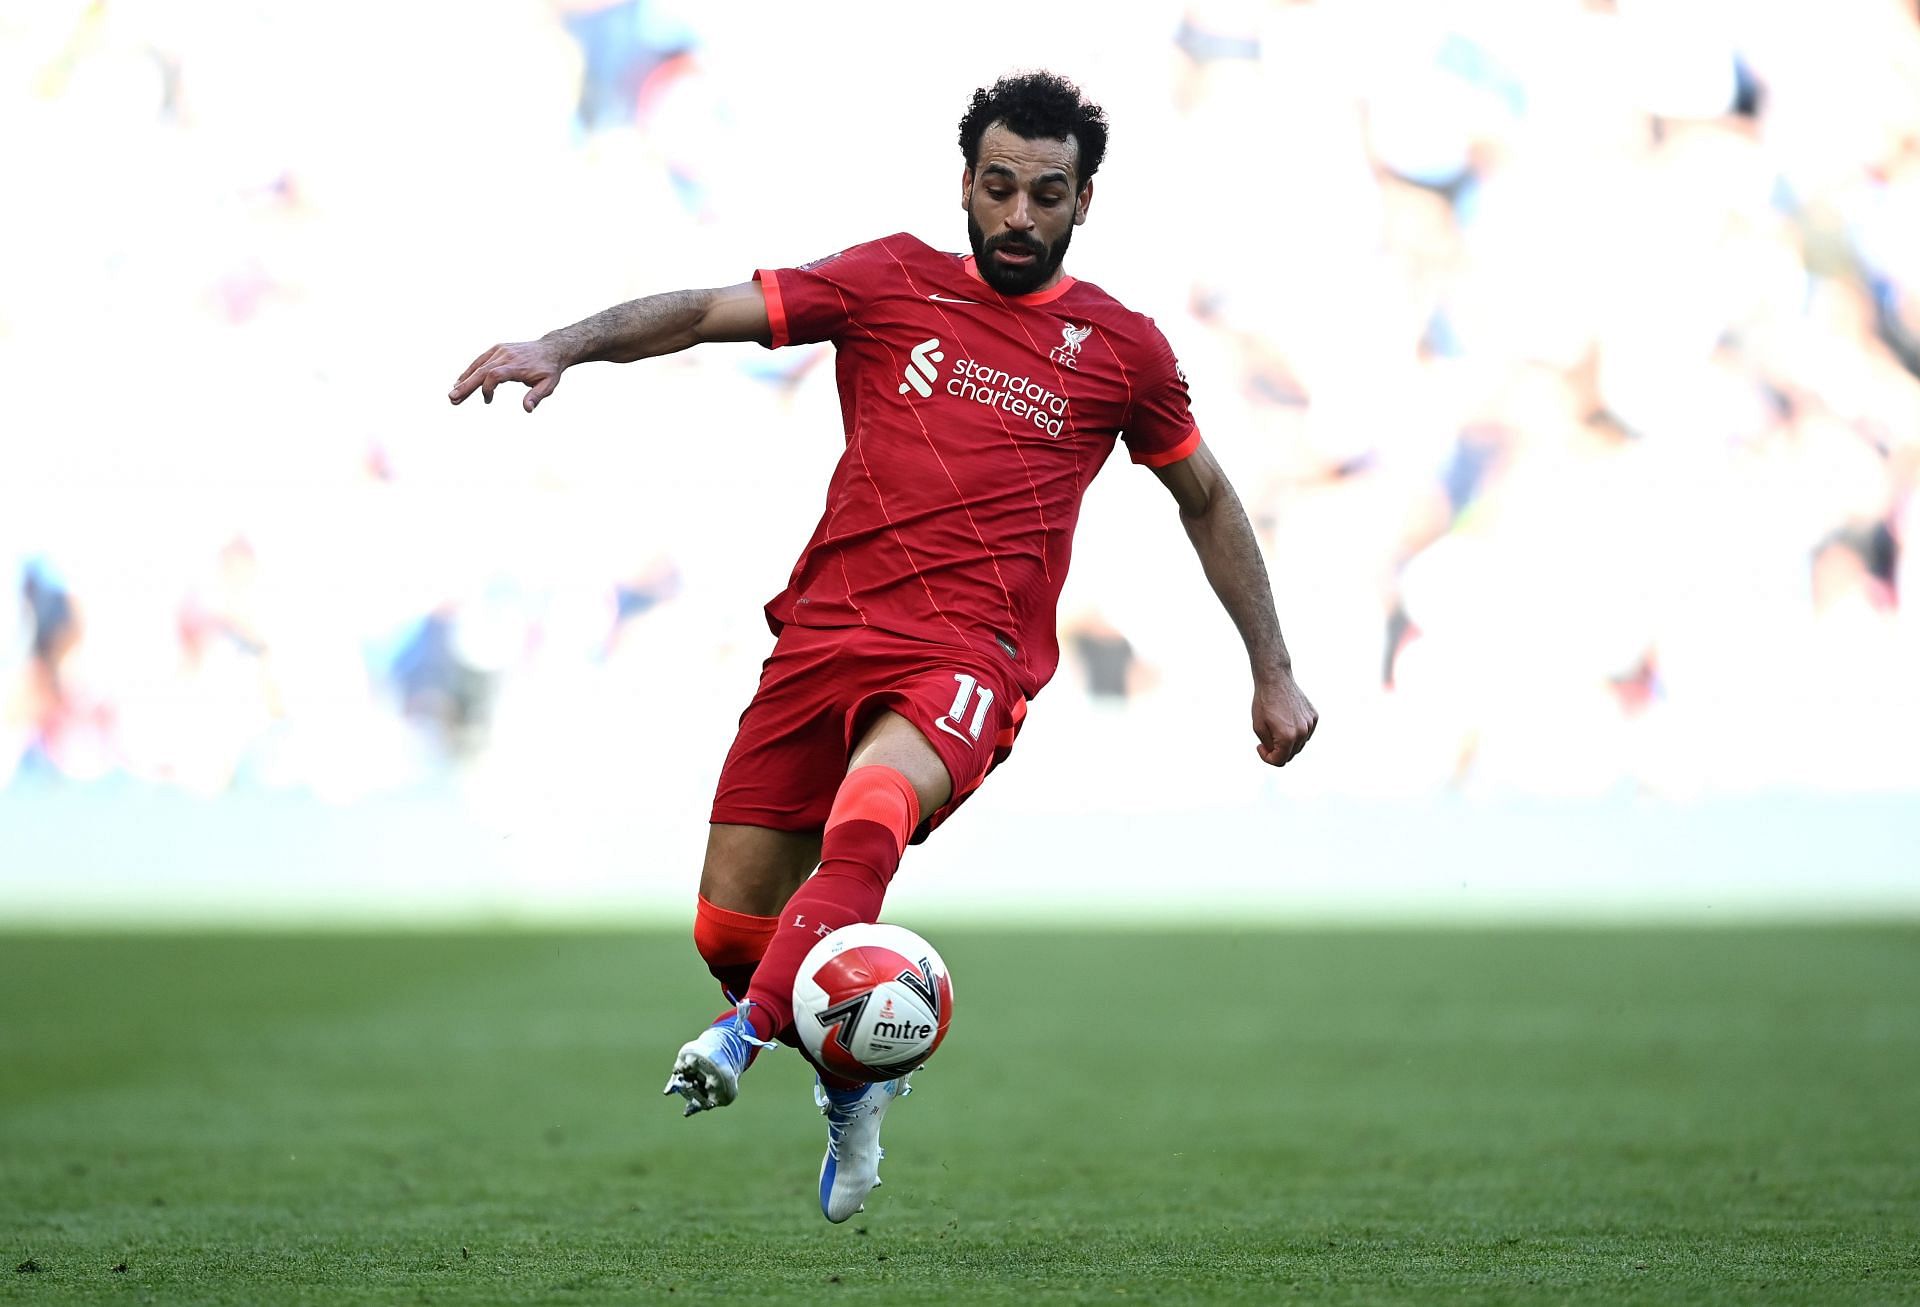 Mohamed Salah will be facing his former club in the final